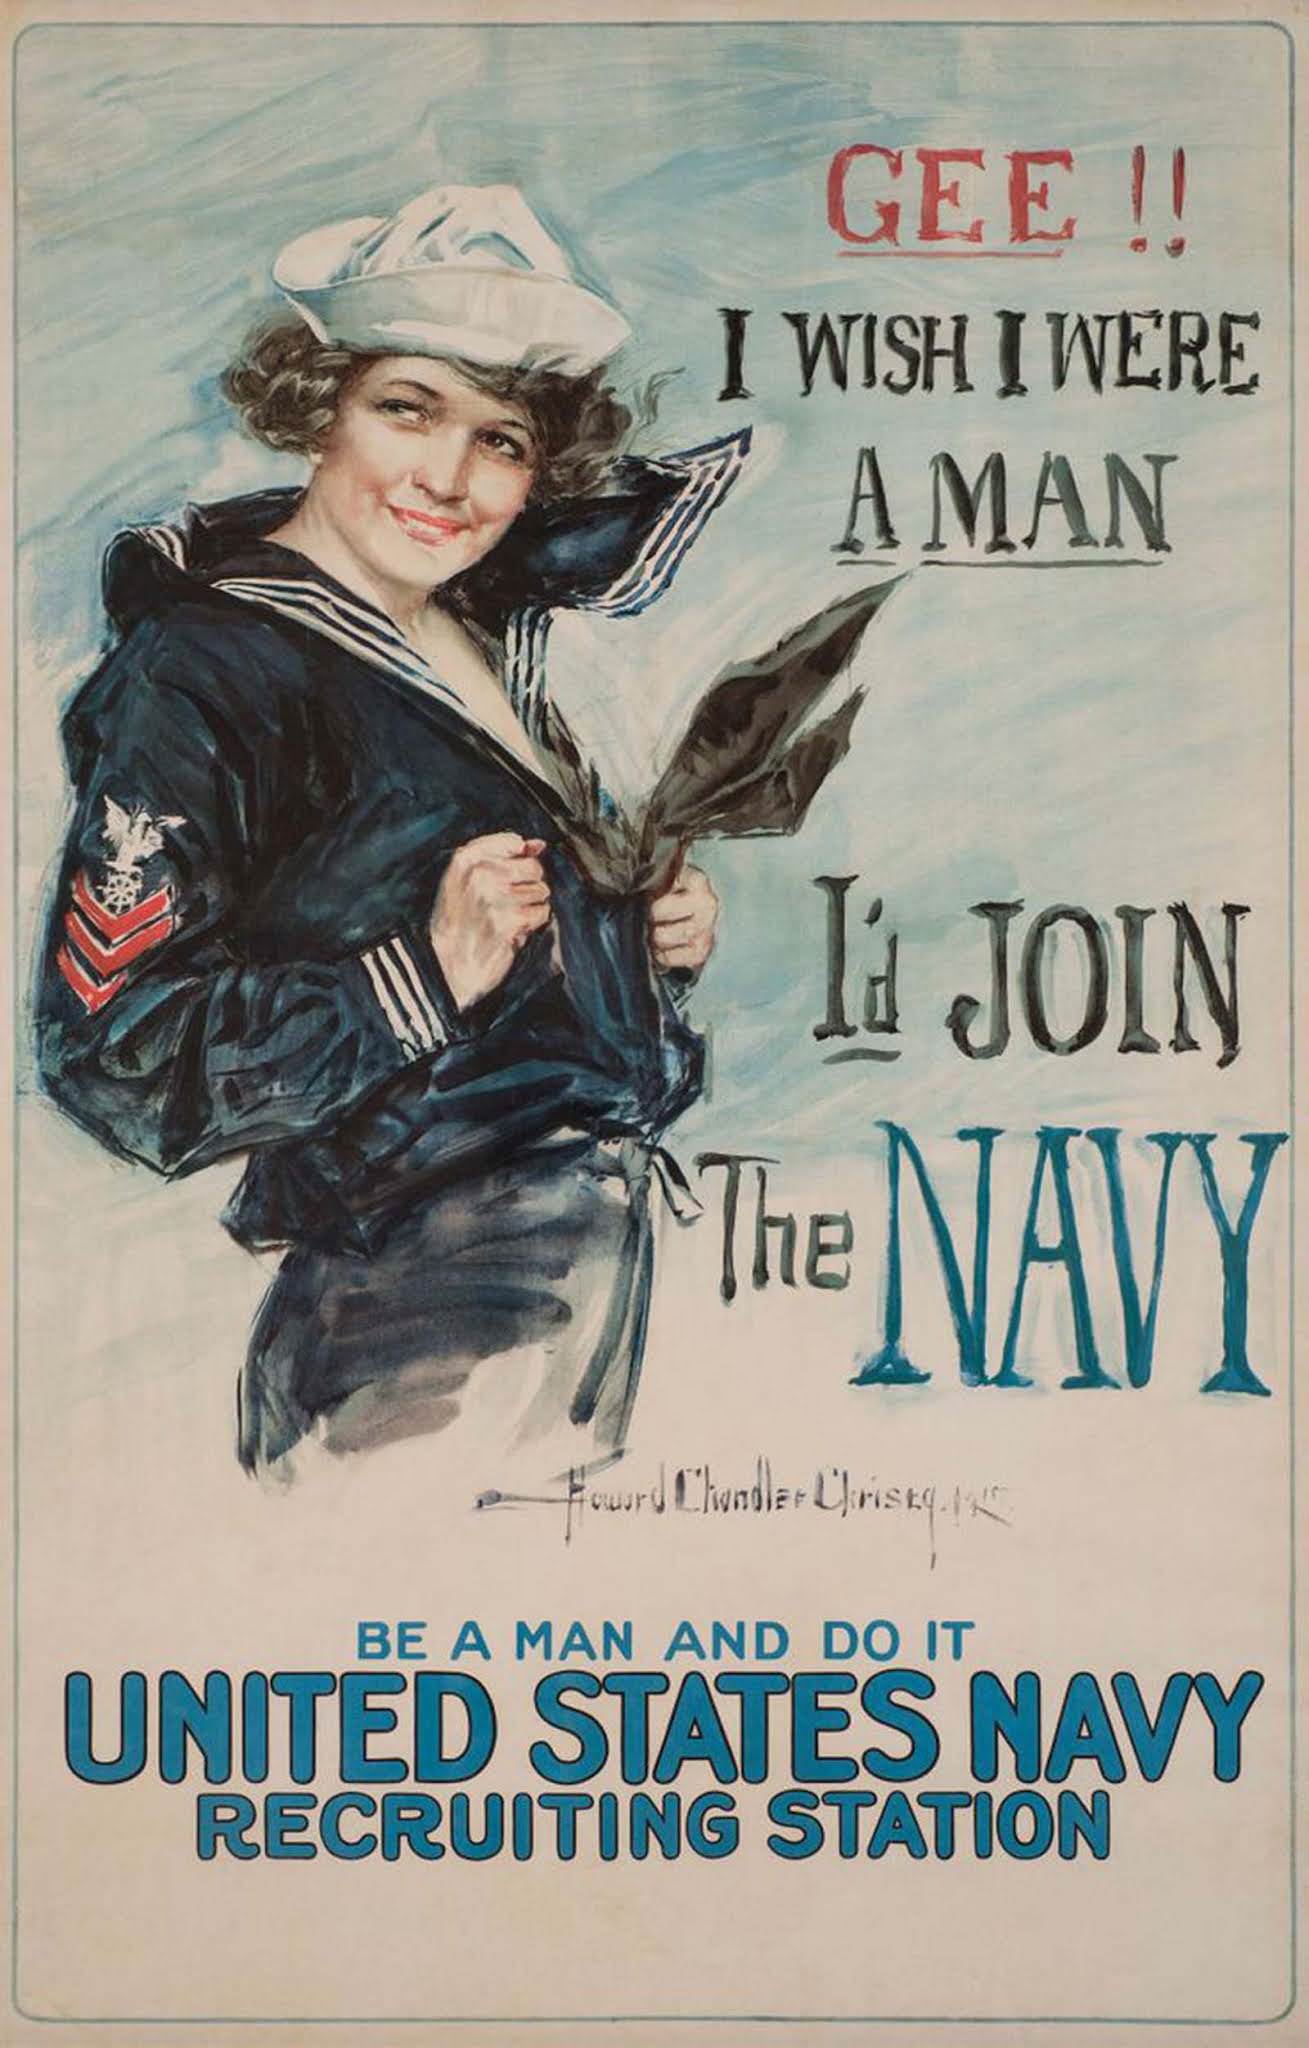 An advert intended to shame men into joining the army.